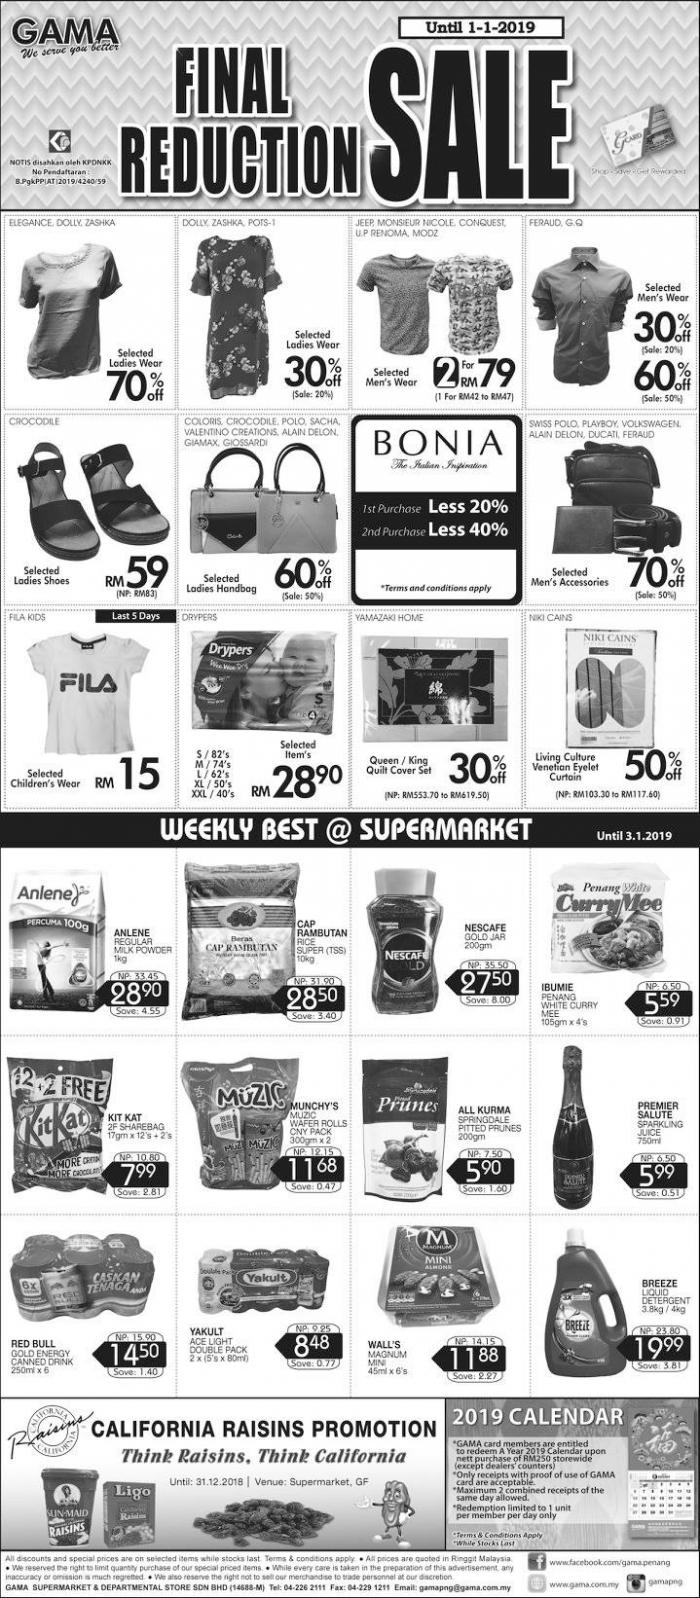 Gama Final Reduction Sale Promotion (28 December 2018 - 3 January 2019)